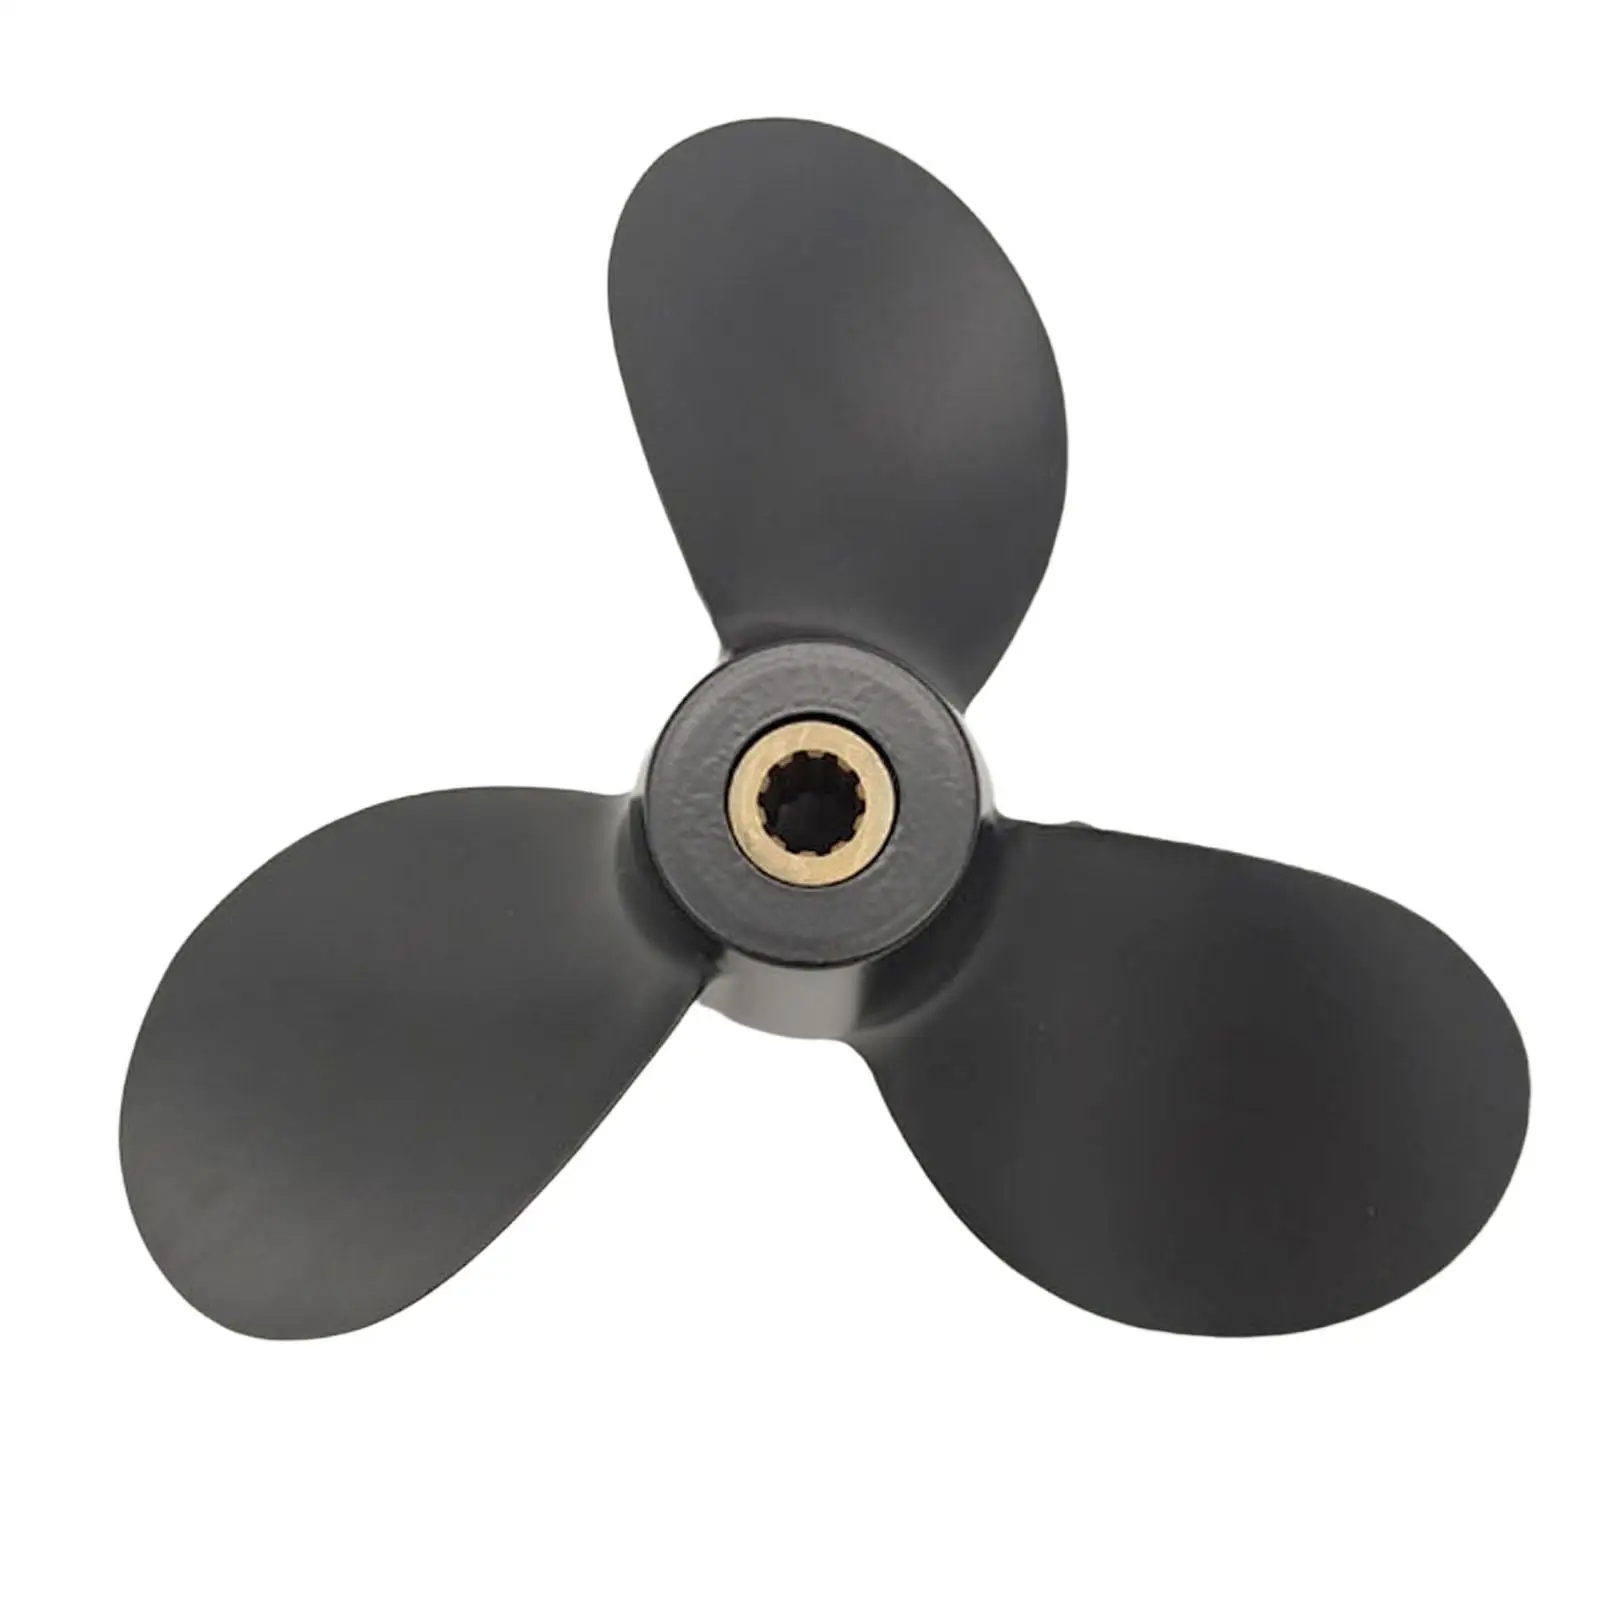 Boat Propeller 7 1/2x7 58111-98651-019 Durable Easily Install for Suzuki 4-6HP